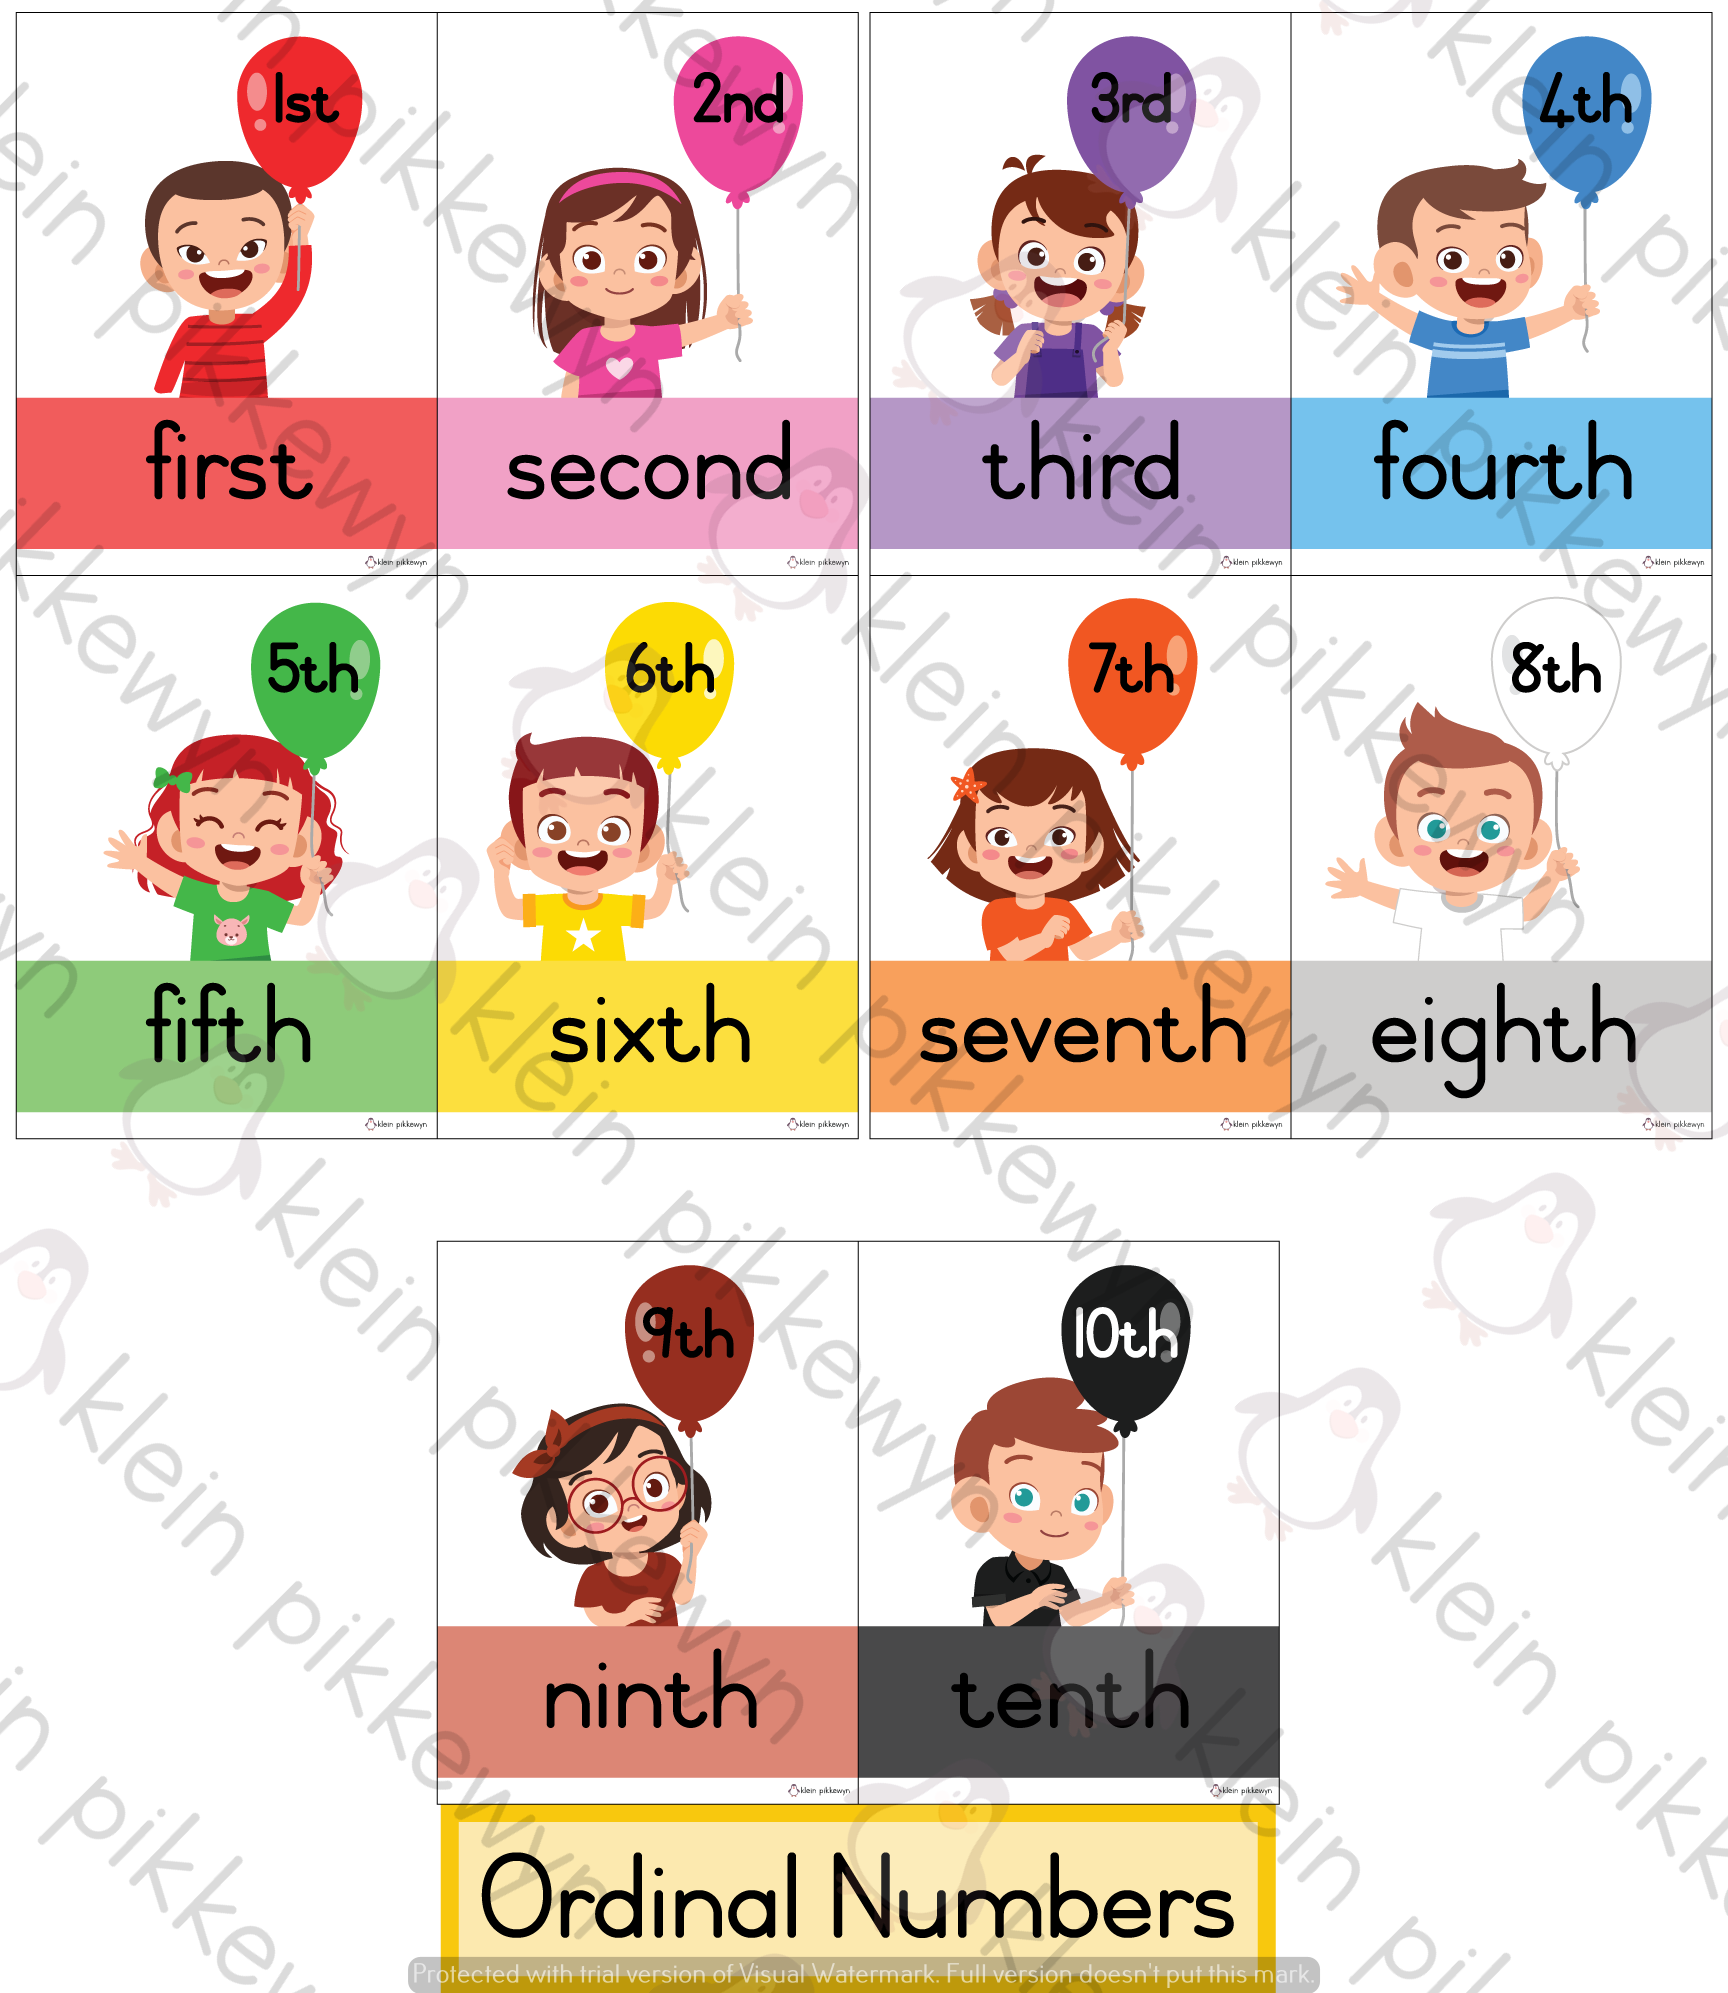 ordinal-numbers-chart-1-10